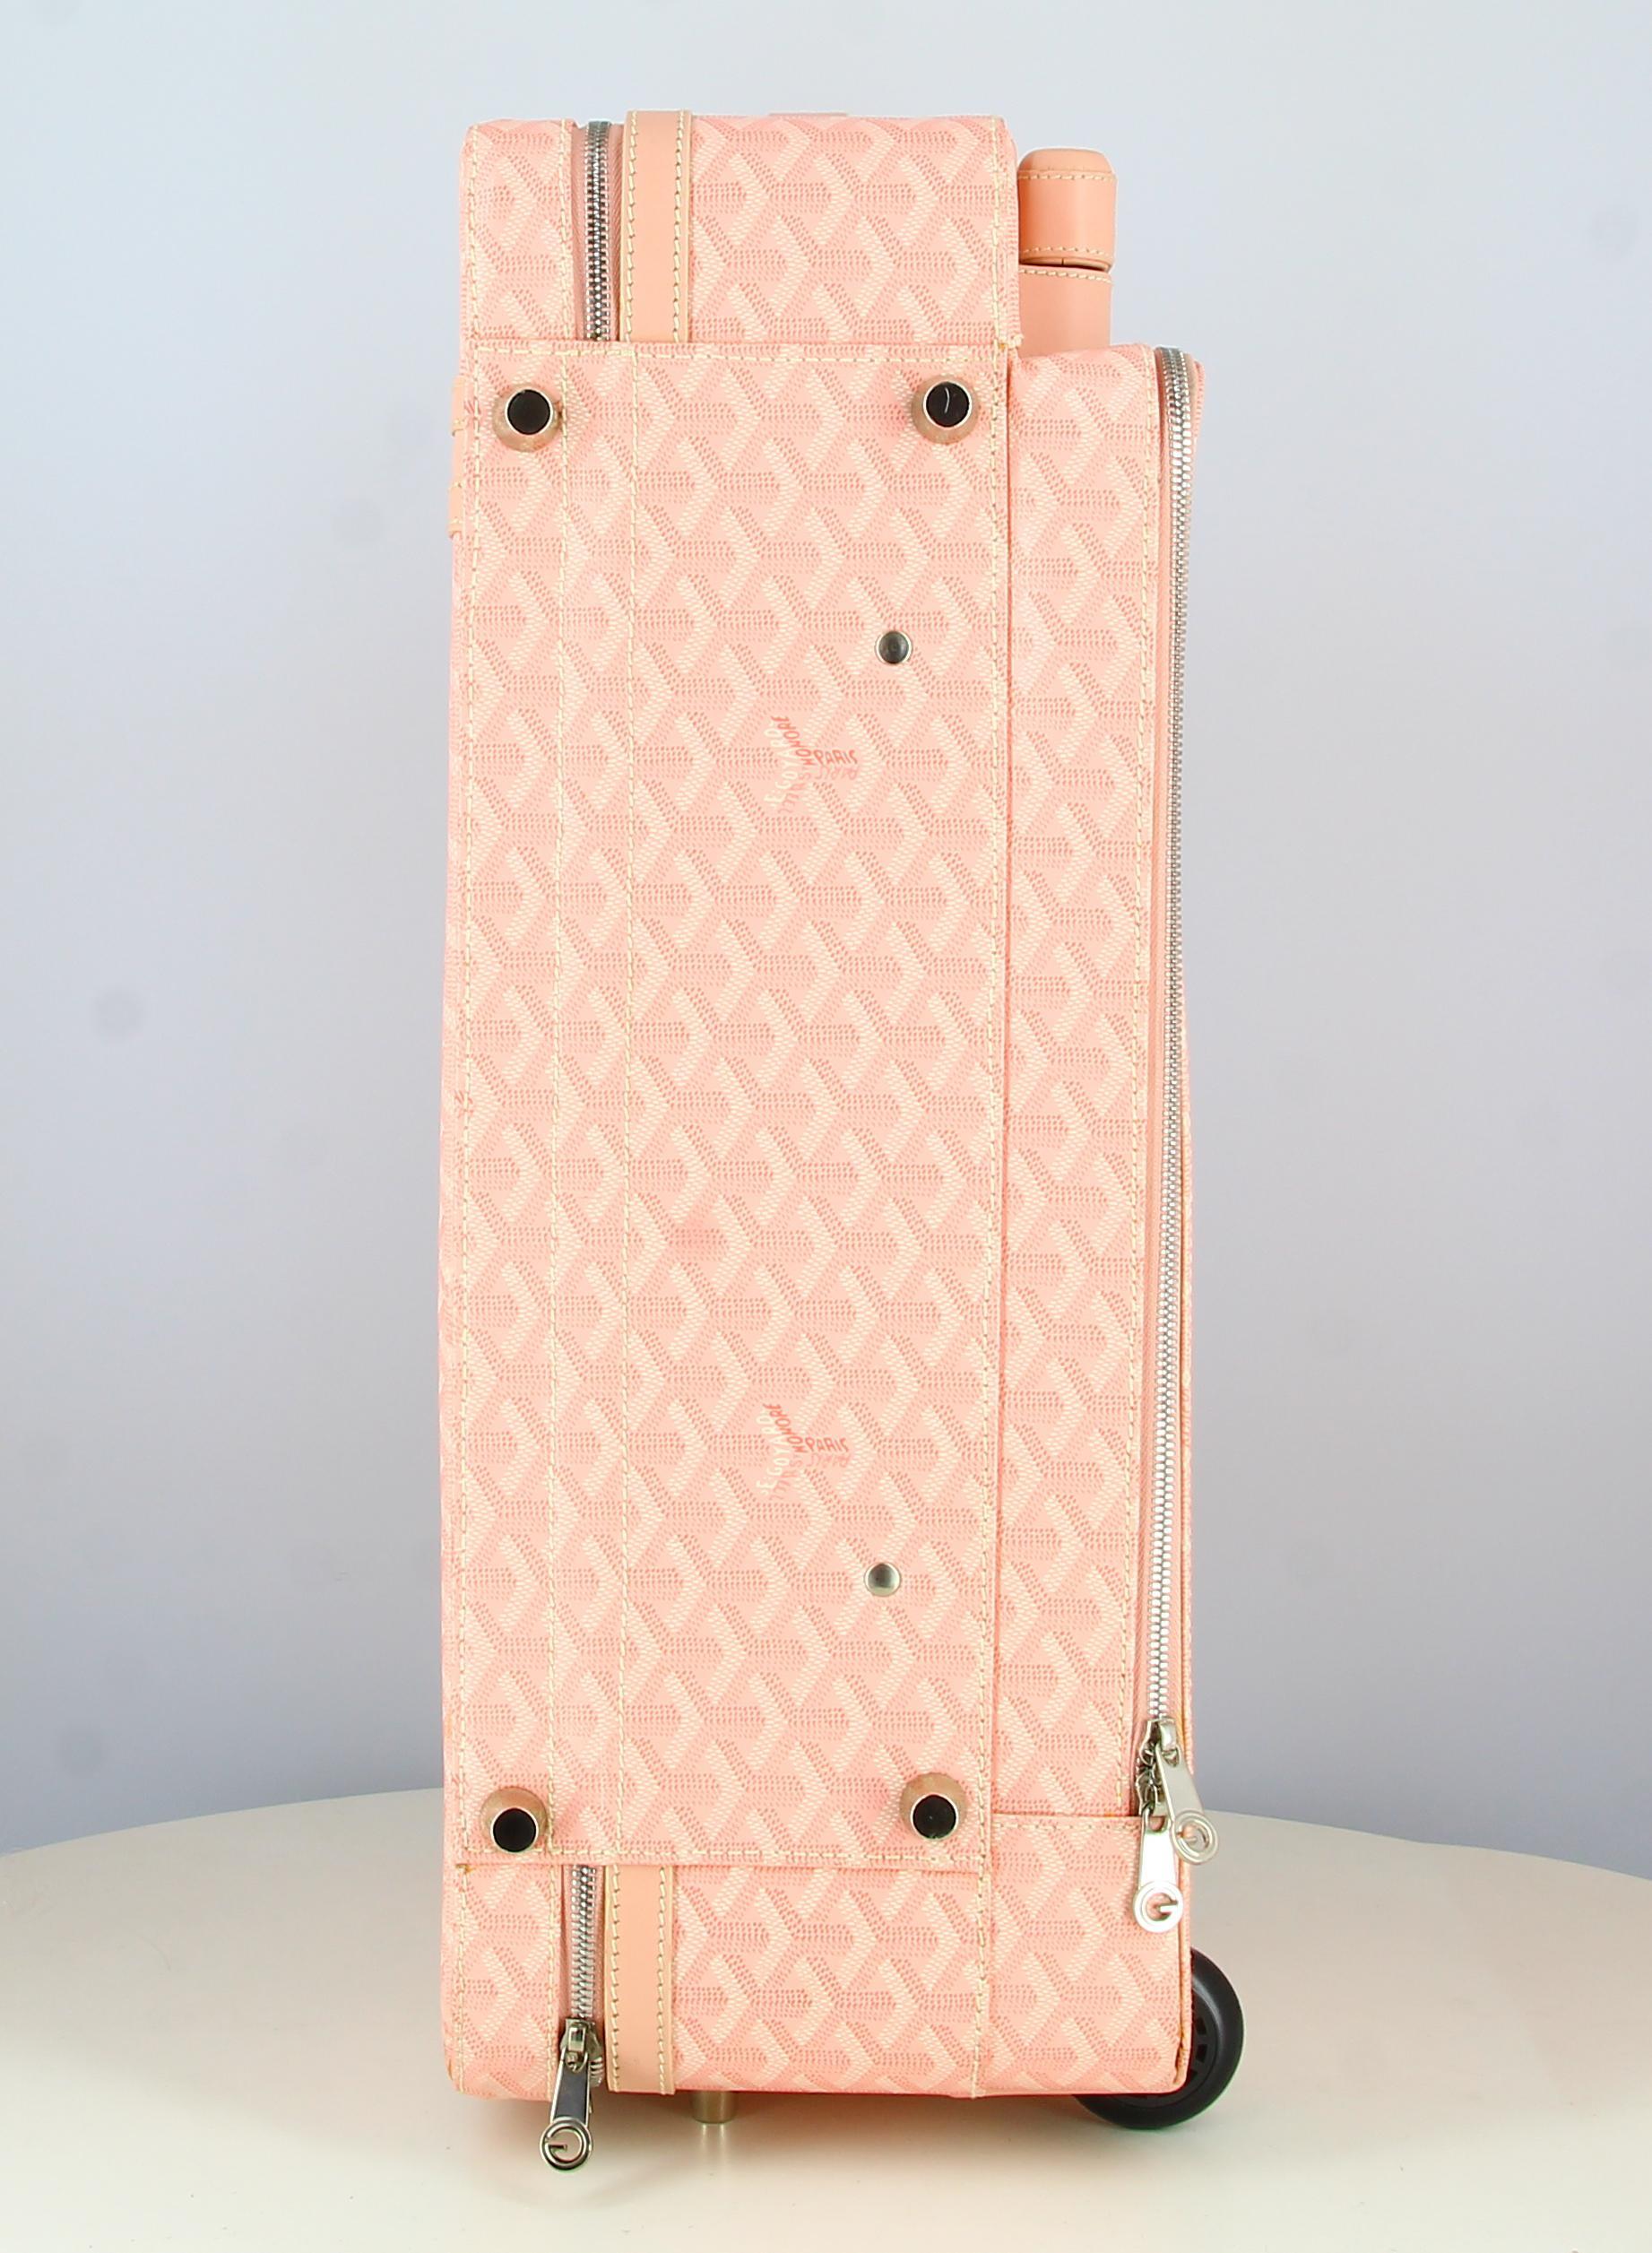 Goyard Monogram Pink Suitcase with Ken profile In Good Condition For Sale In PARIS, FR